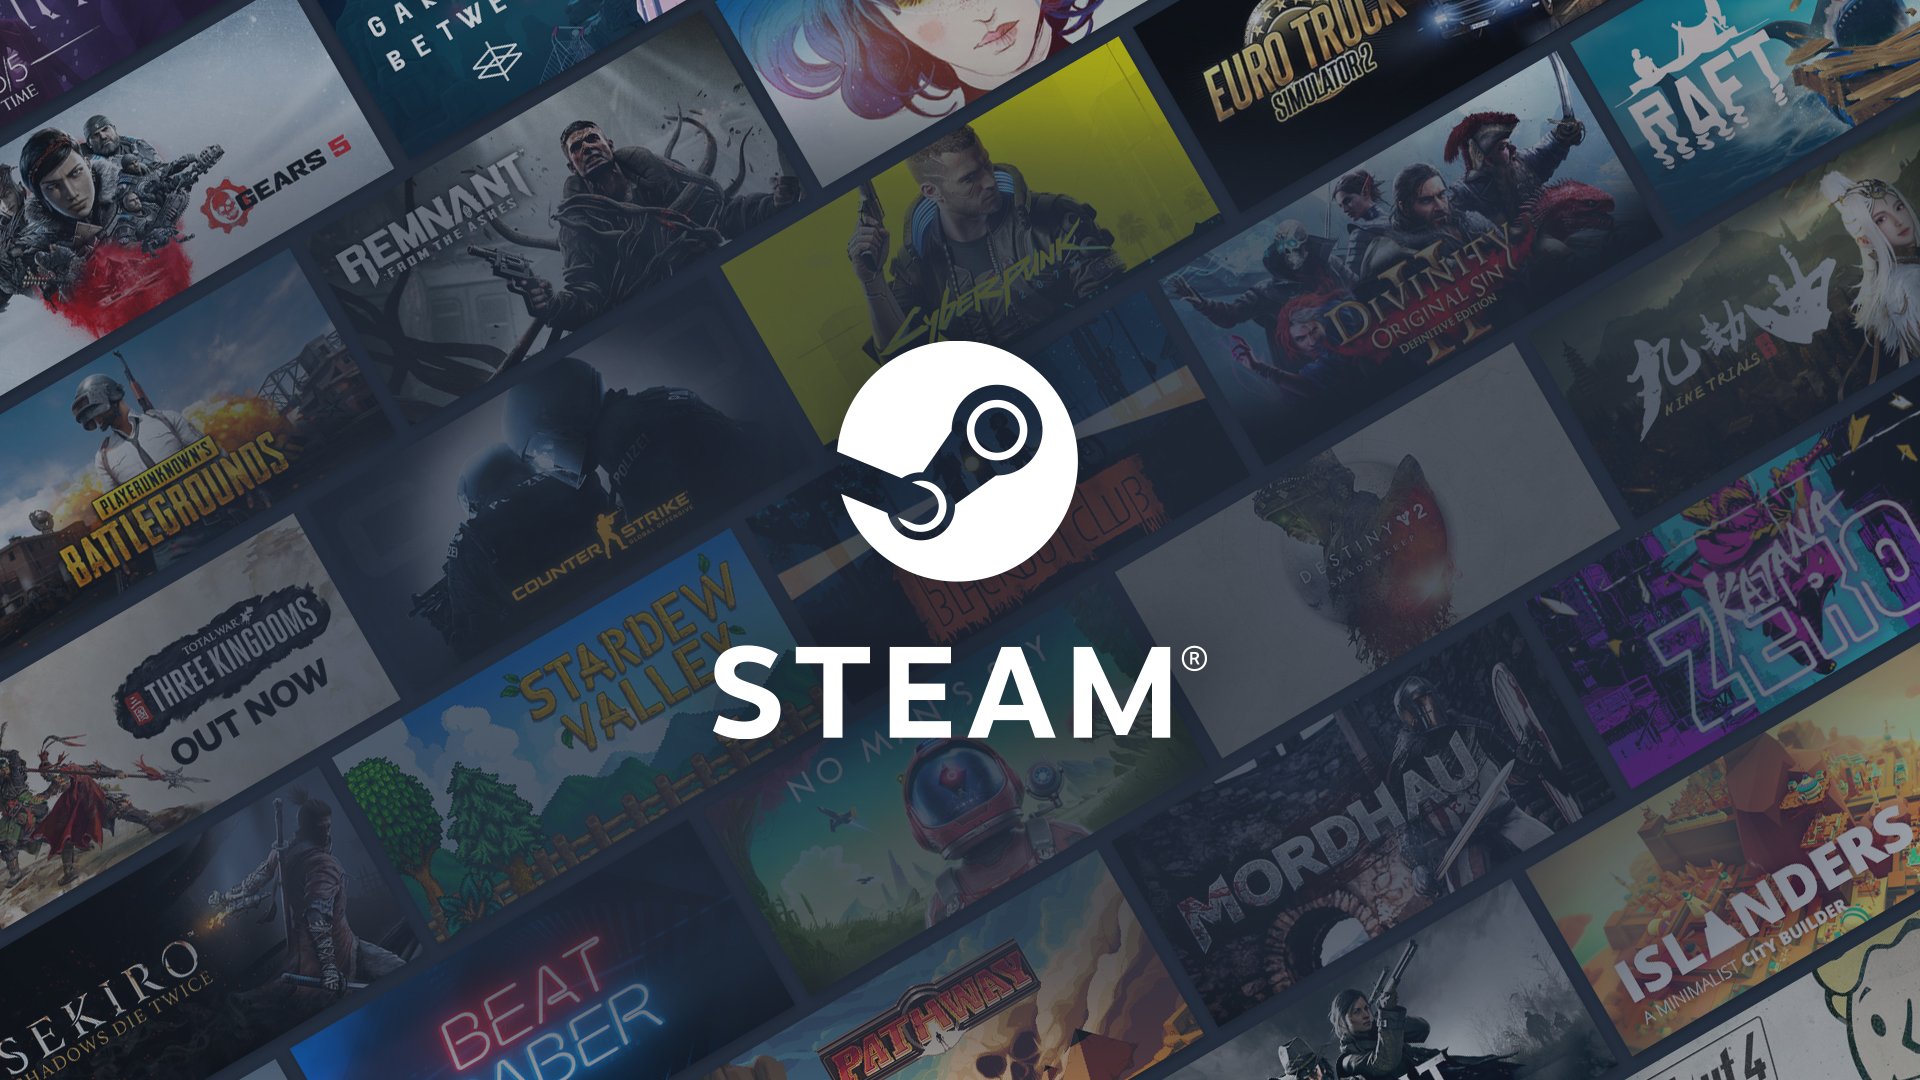 Steam Publisher: Rogueside